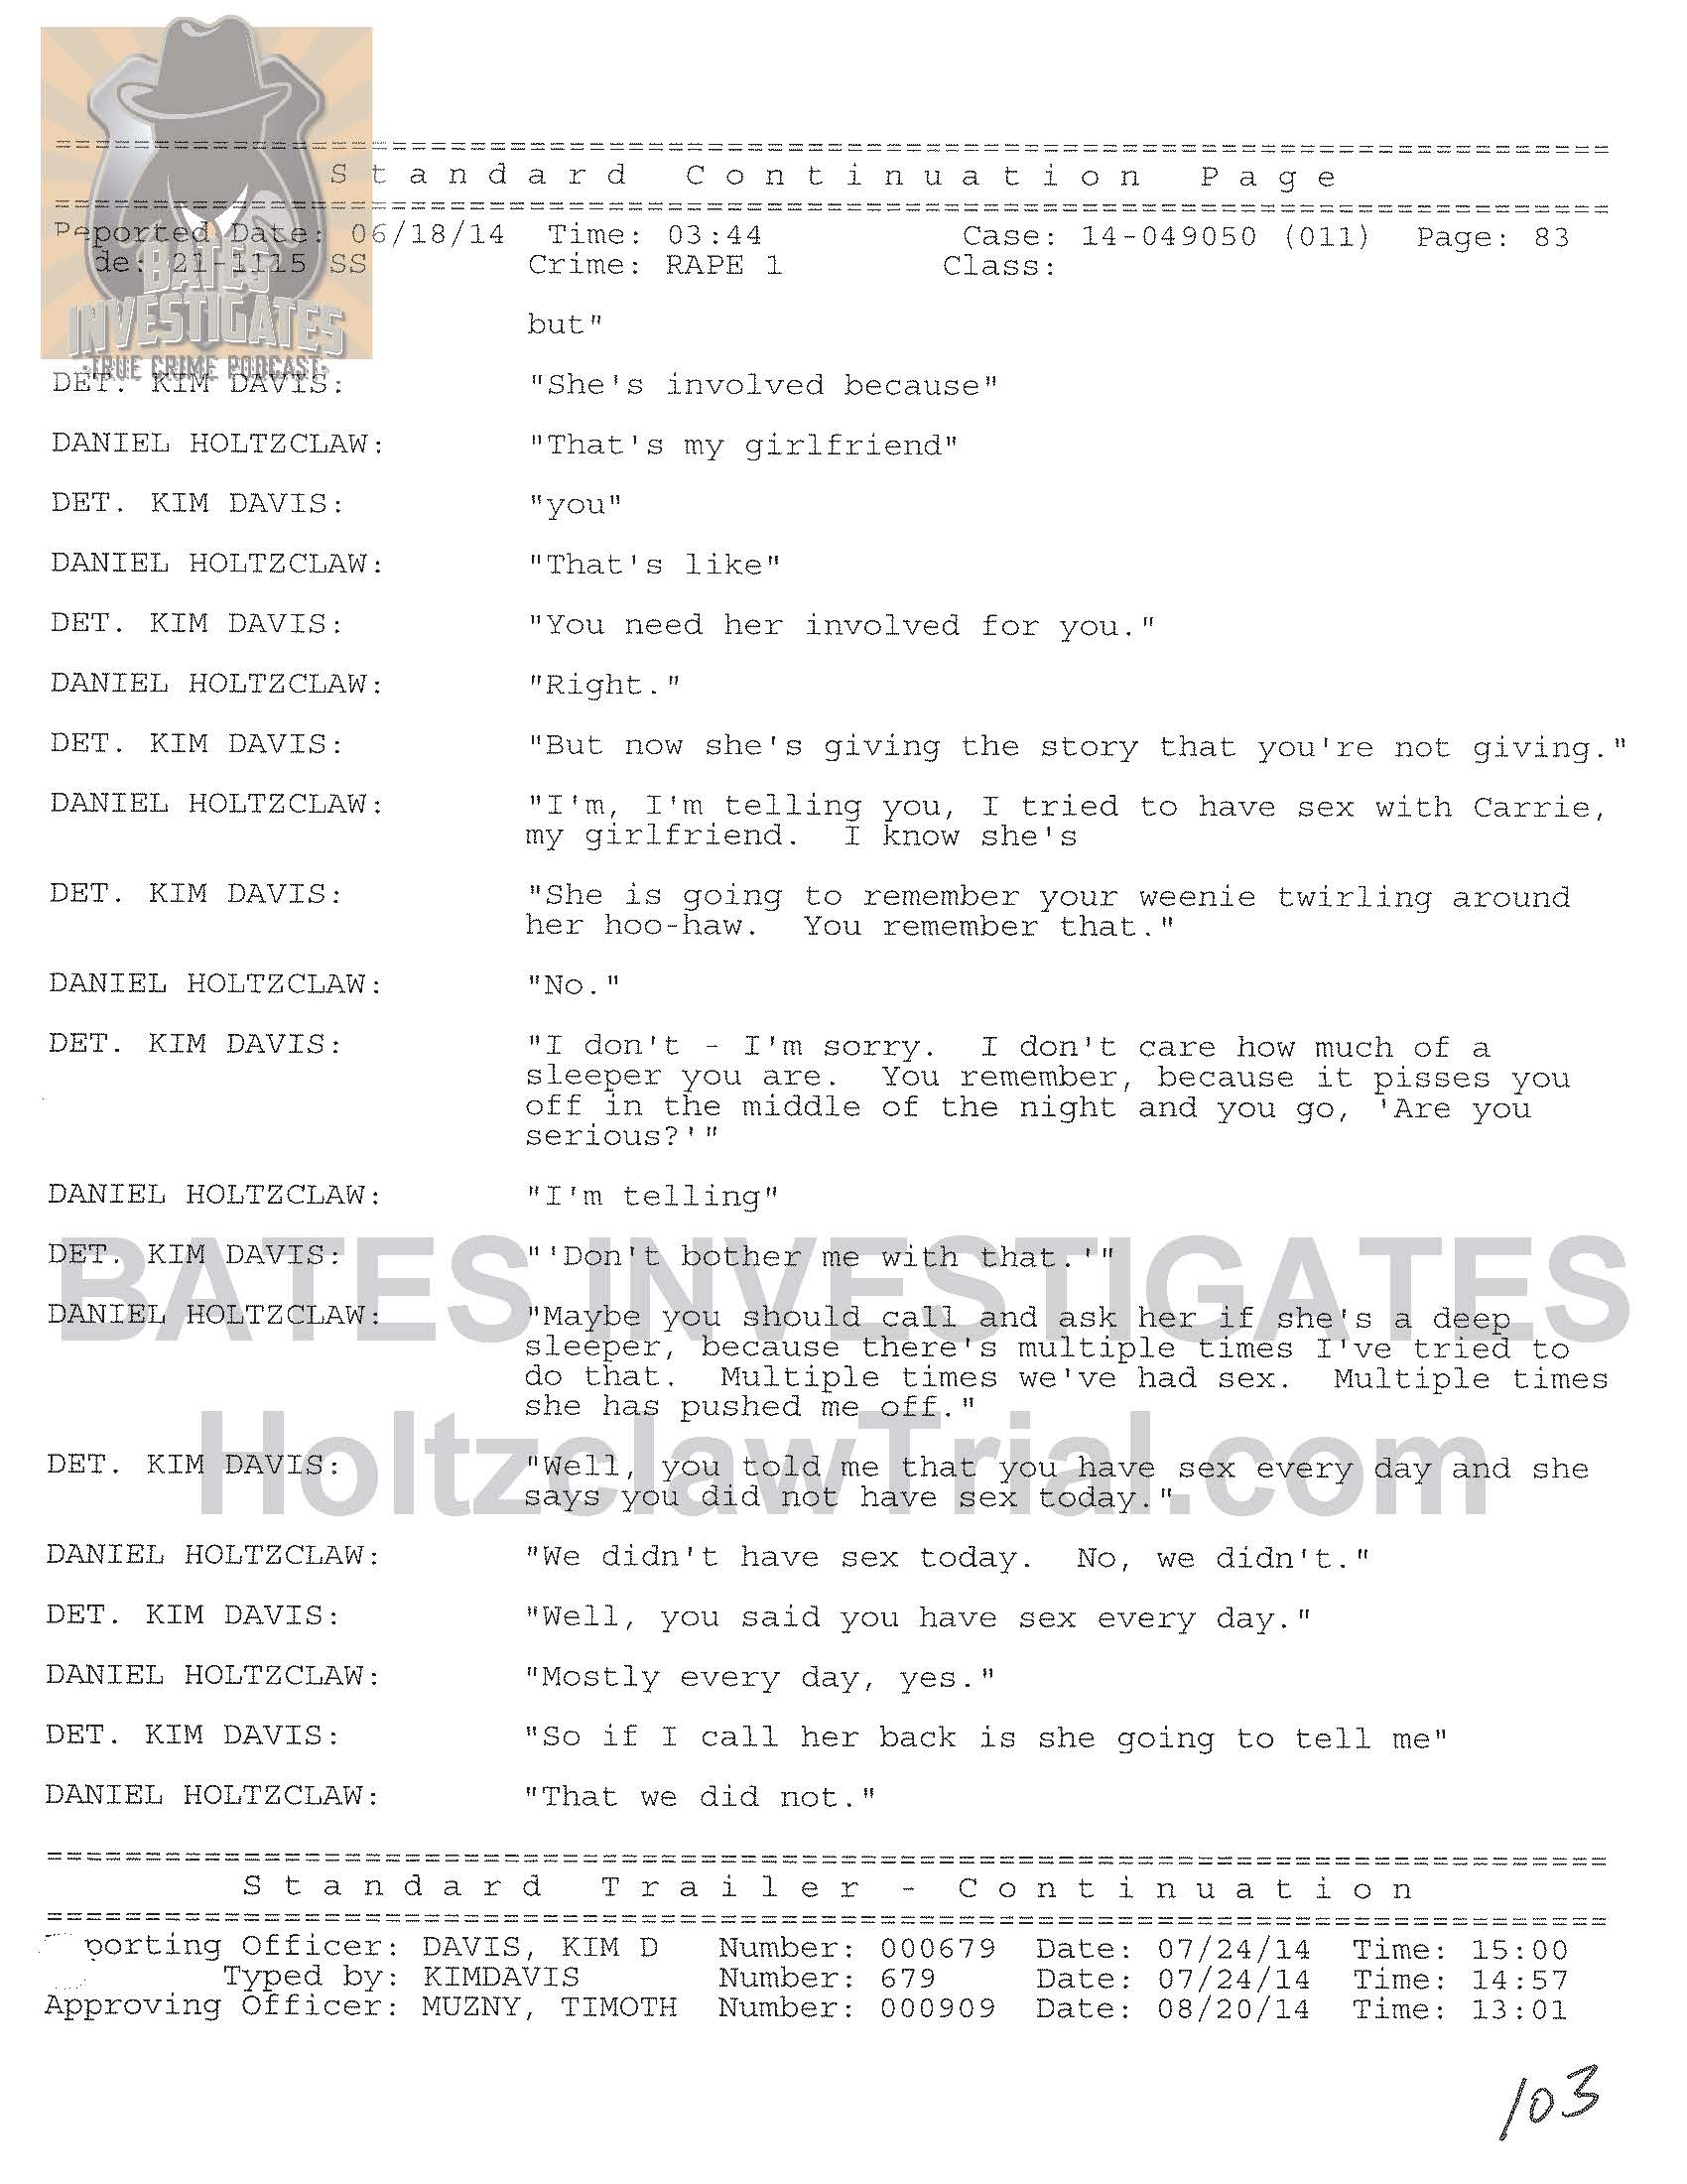 Holtzclaw Interrogation Transcript - Ep02 Redacted_Page_83.jpg